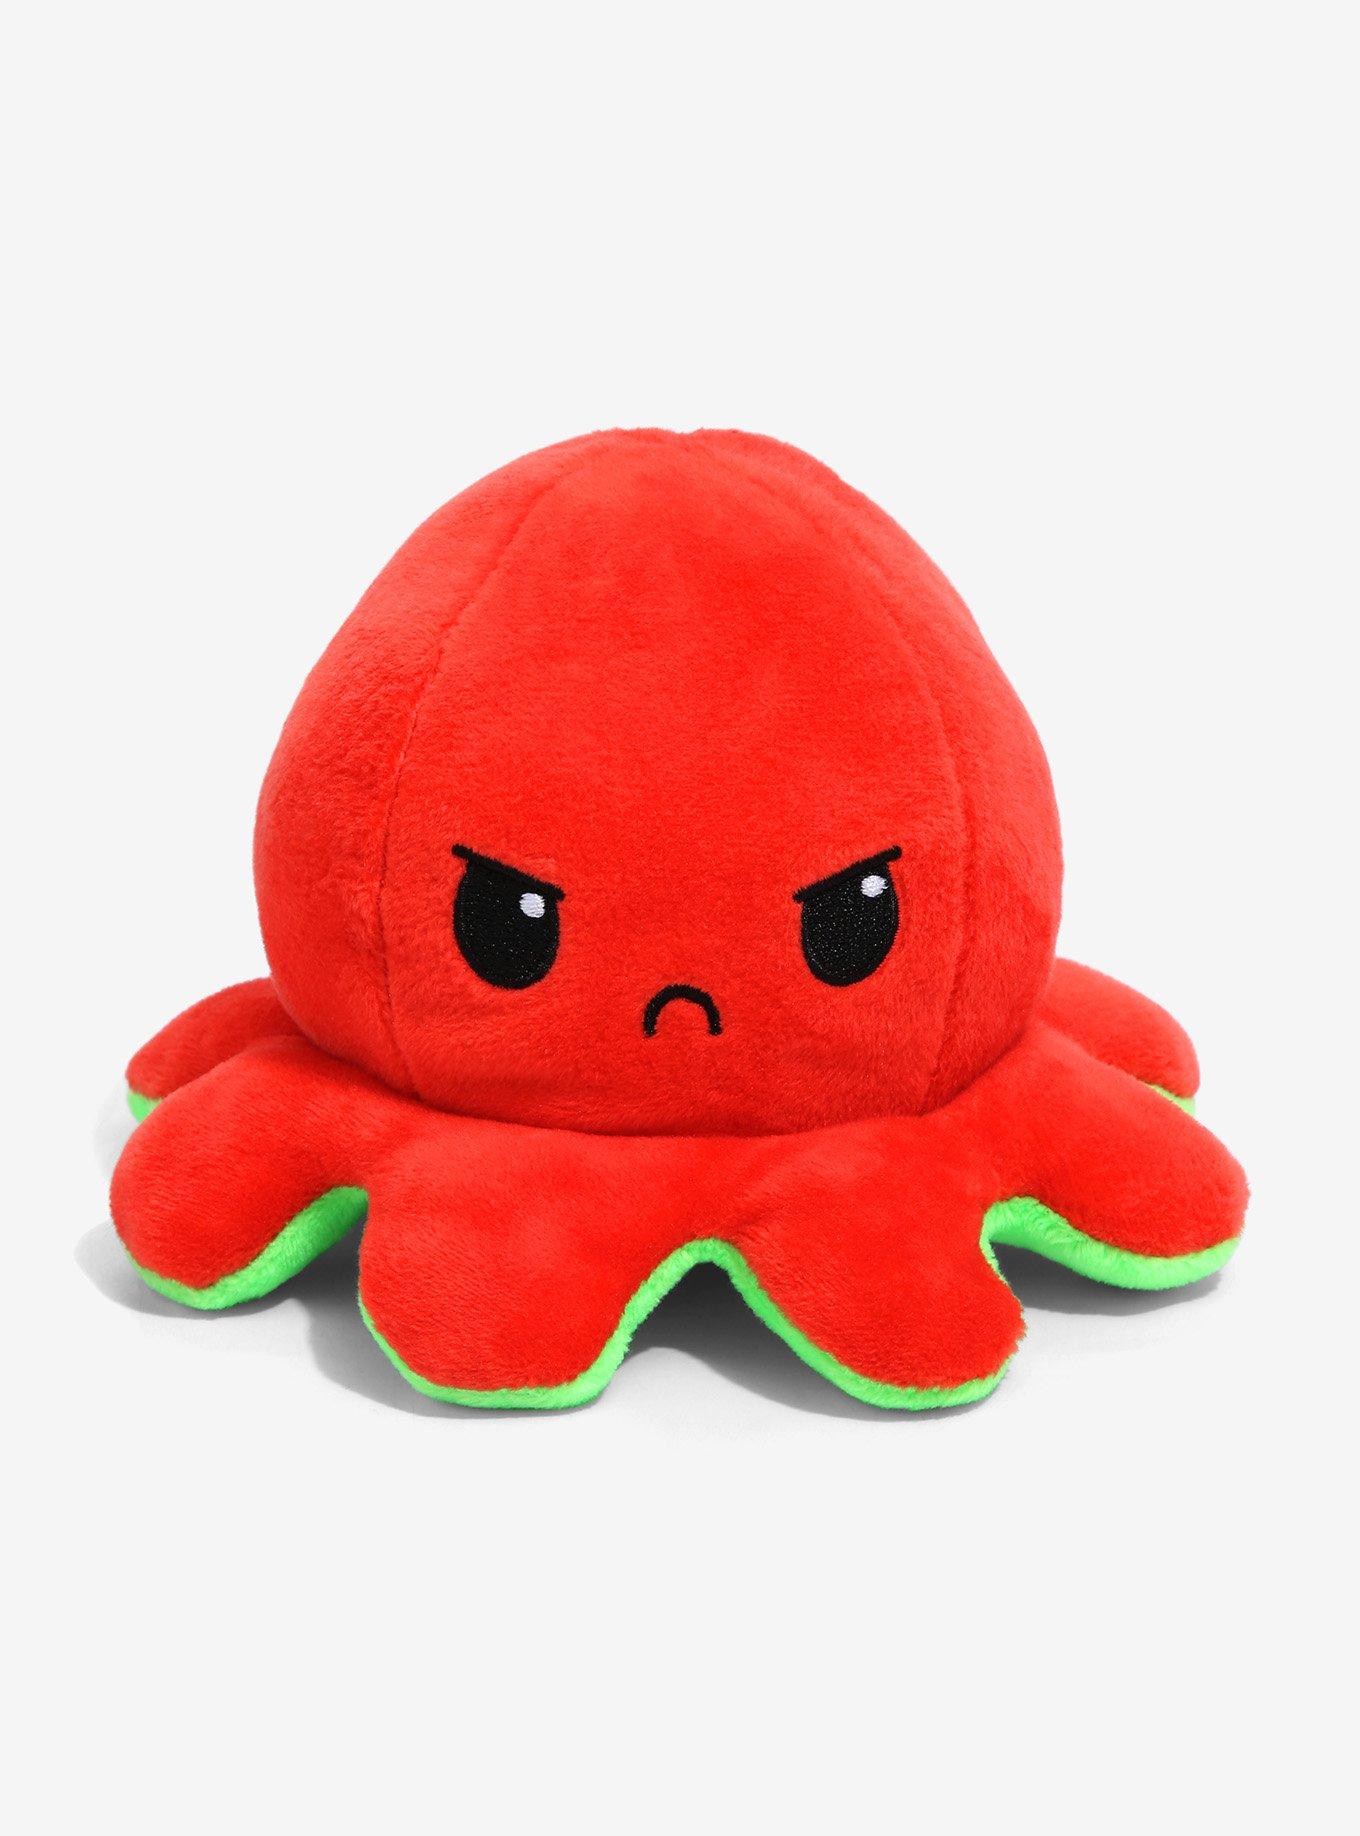 Tee Turtle Angry + Happy Reversible Octopus 5 Inch Plush, , hi-res